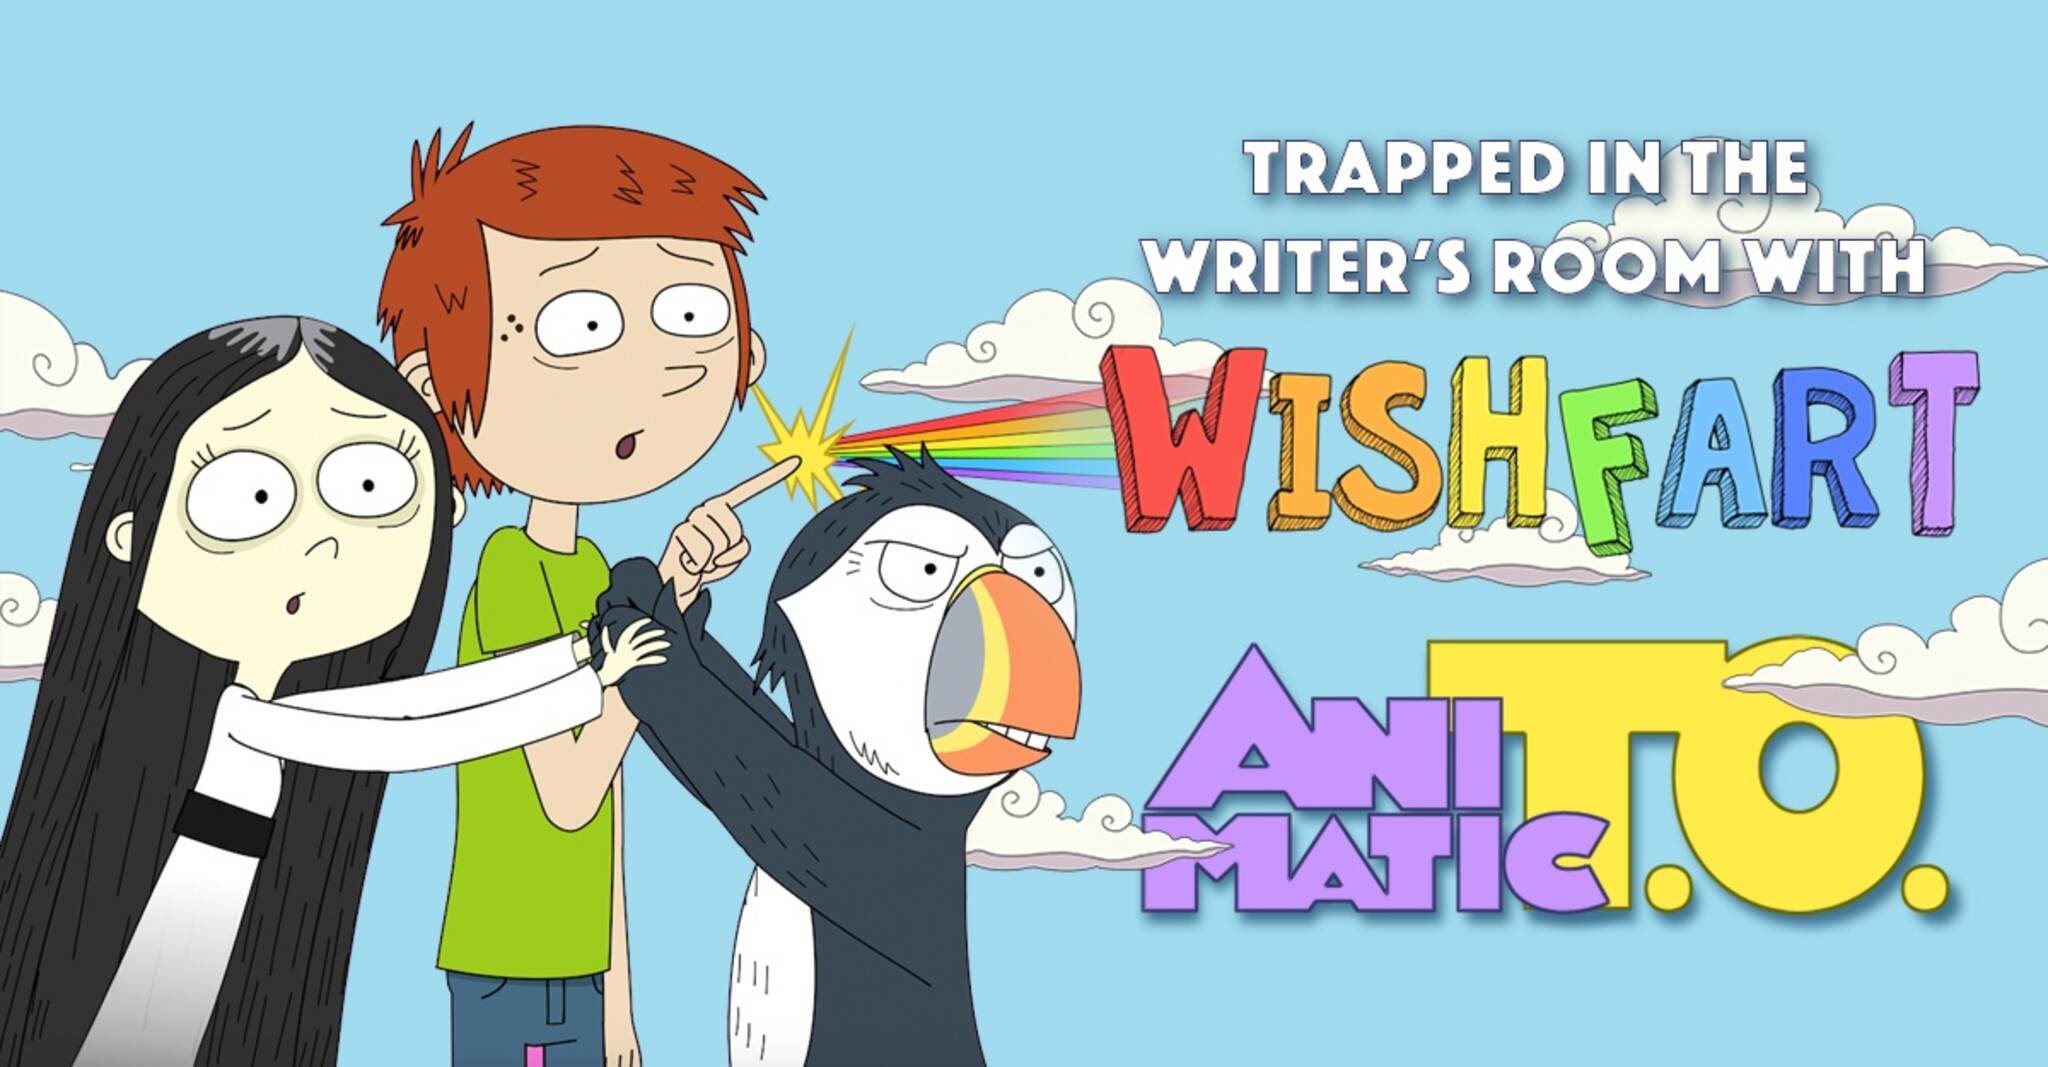 Animatic T.O: Trapped In The Writer's Room With Wishfart!